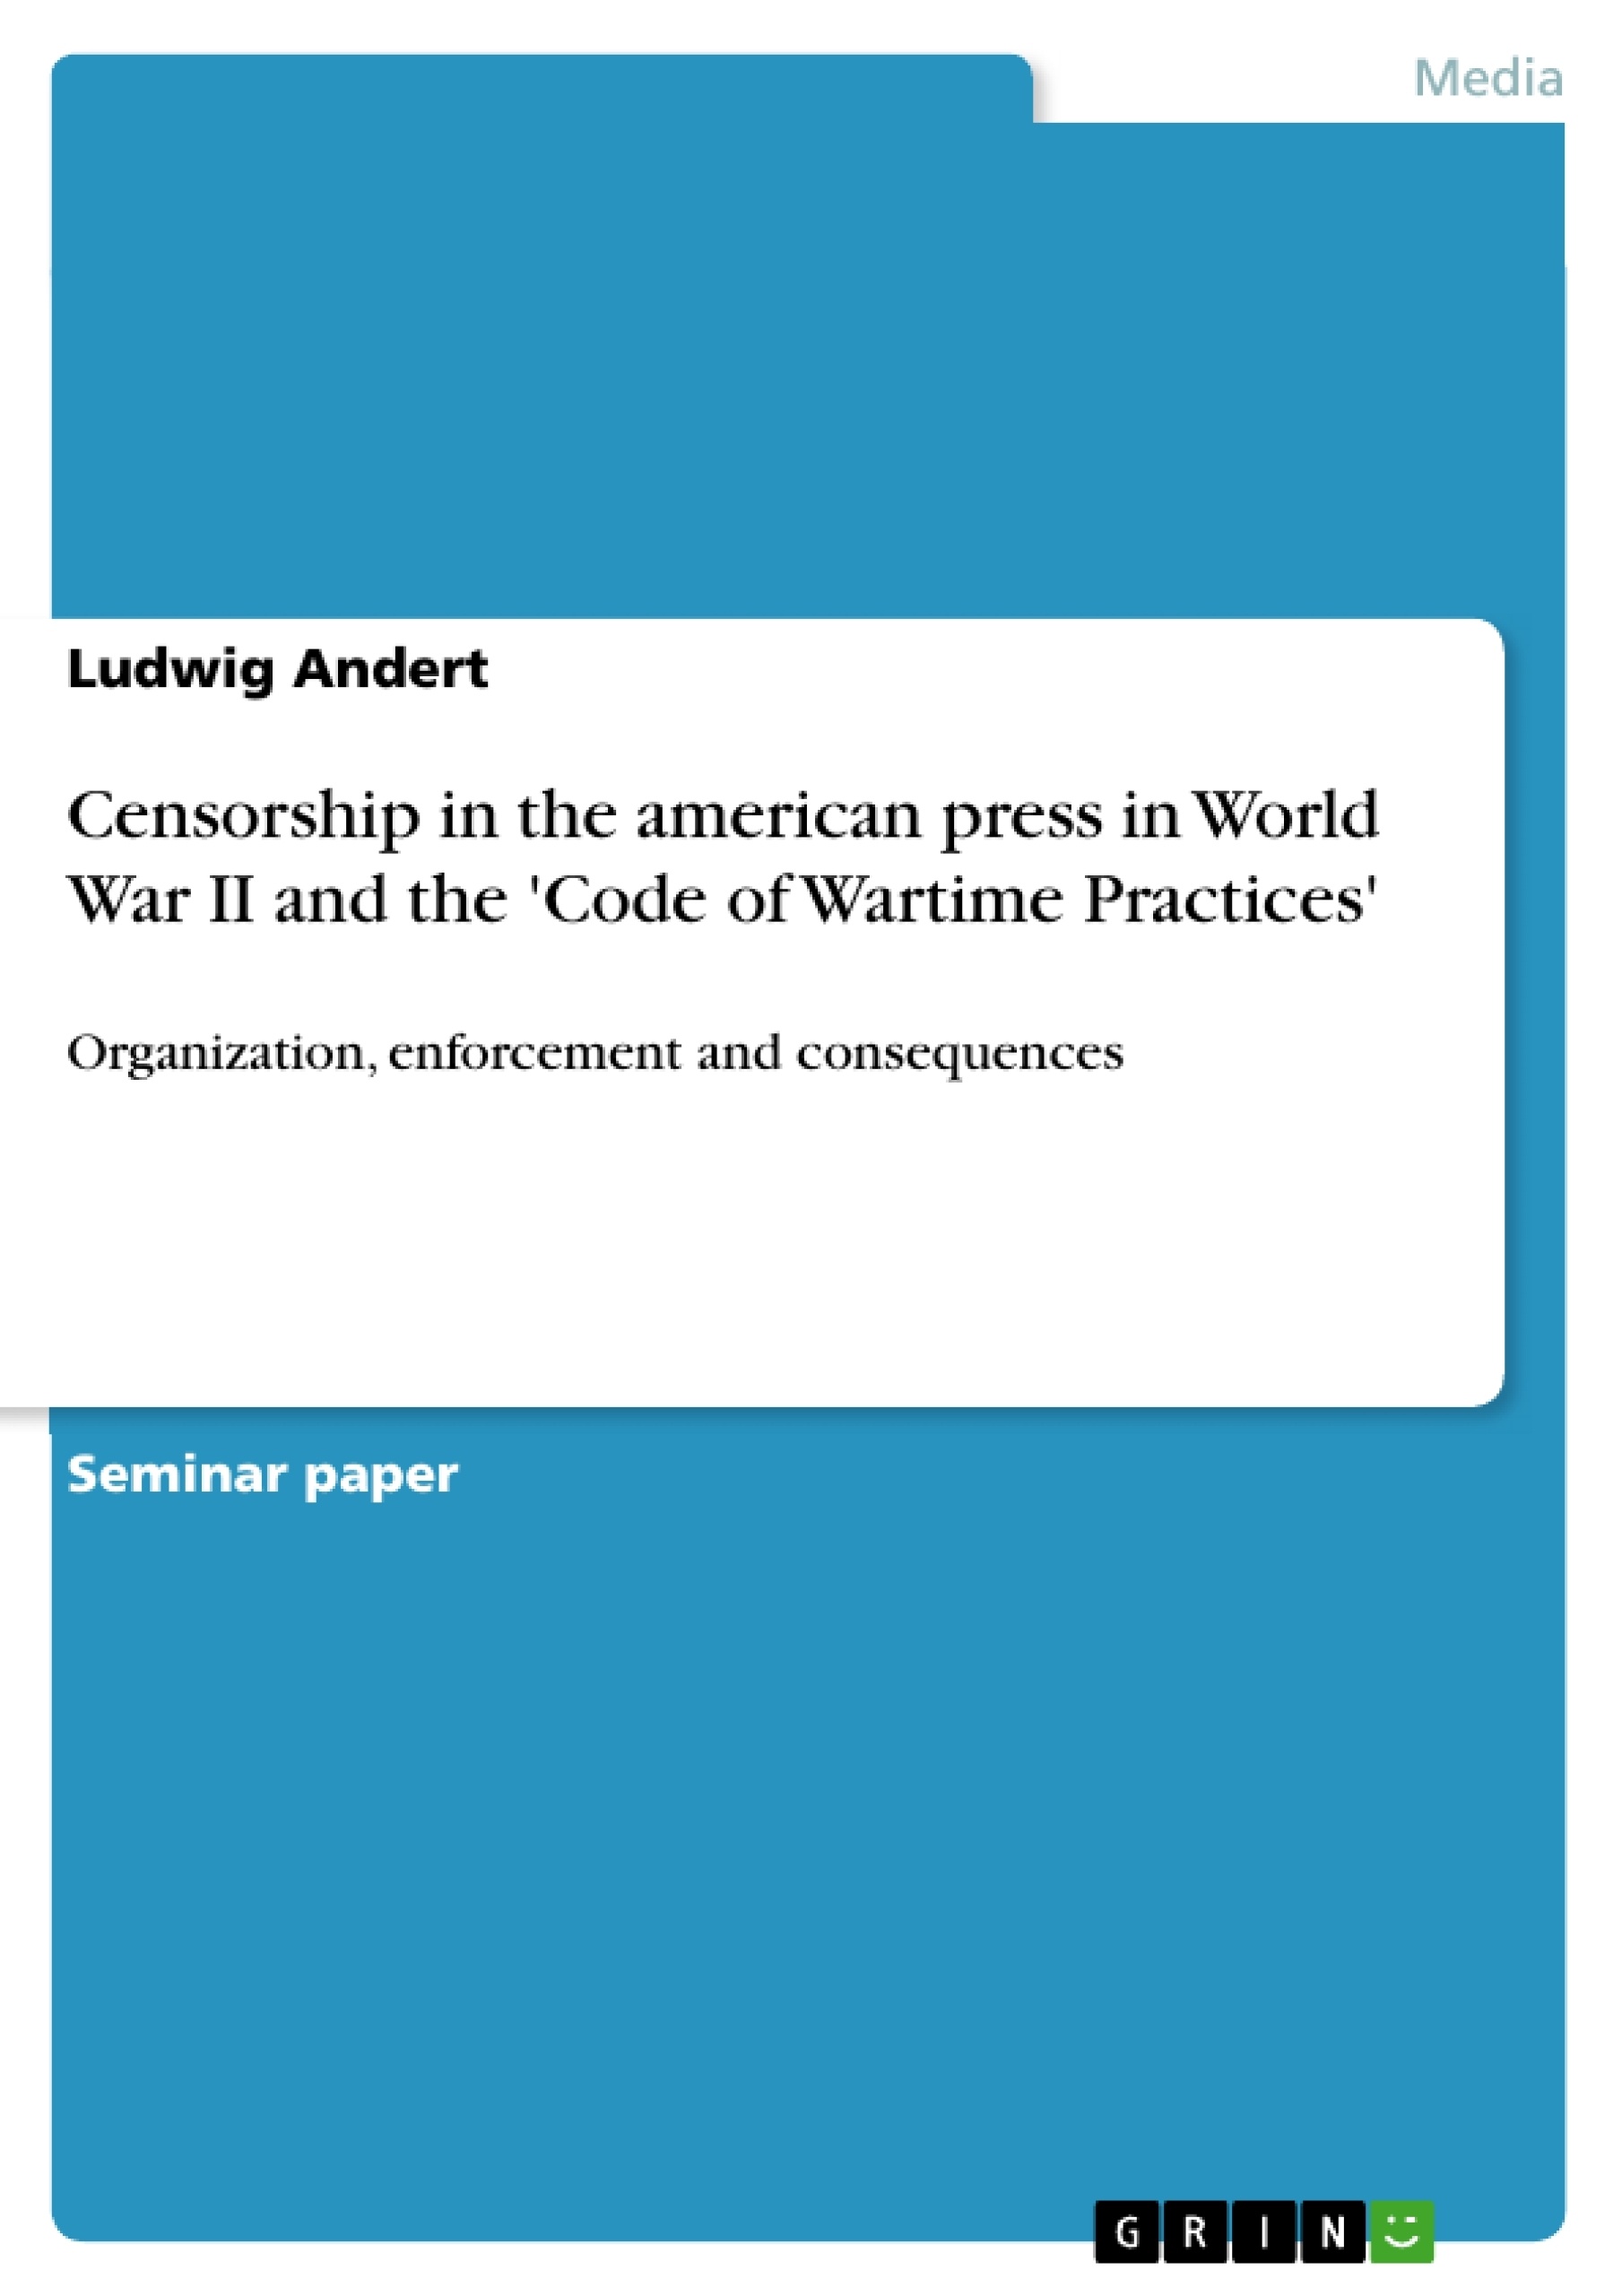 The Pacific War Online Encyclopedia: Codes